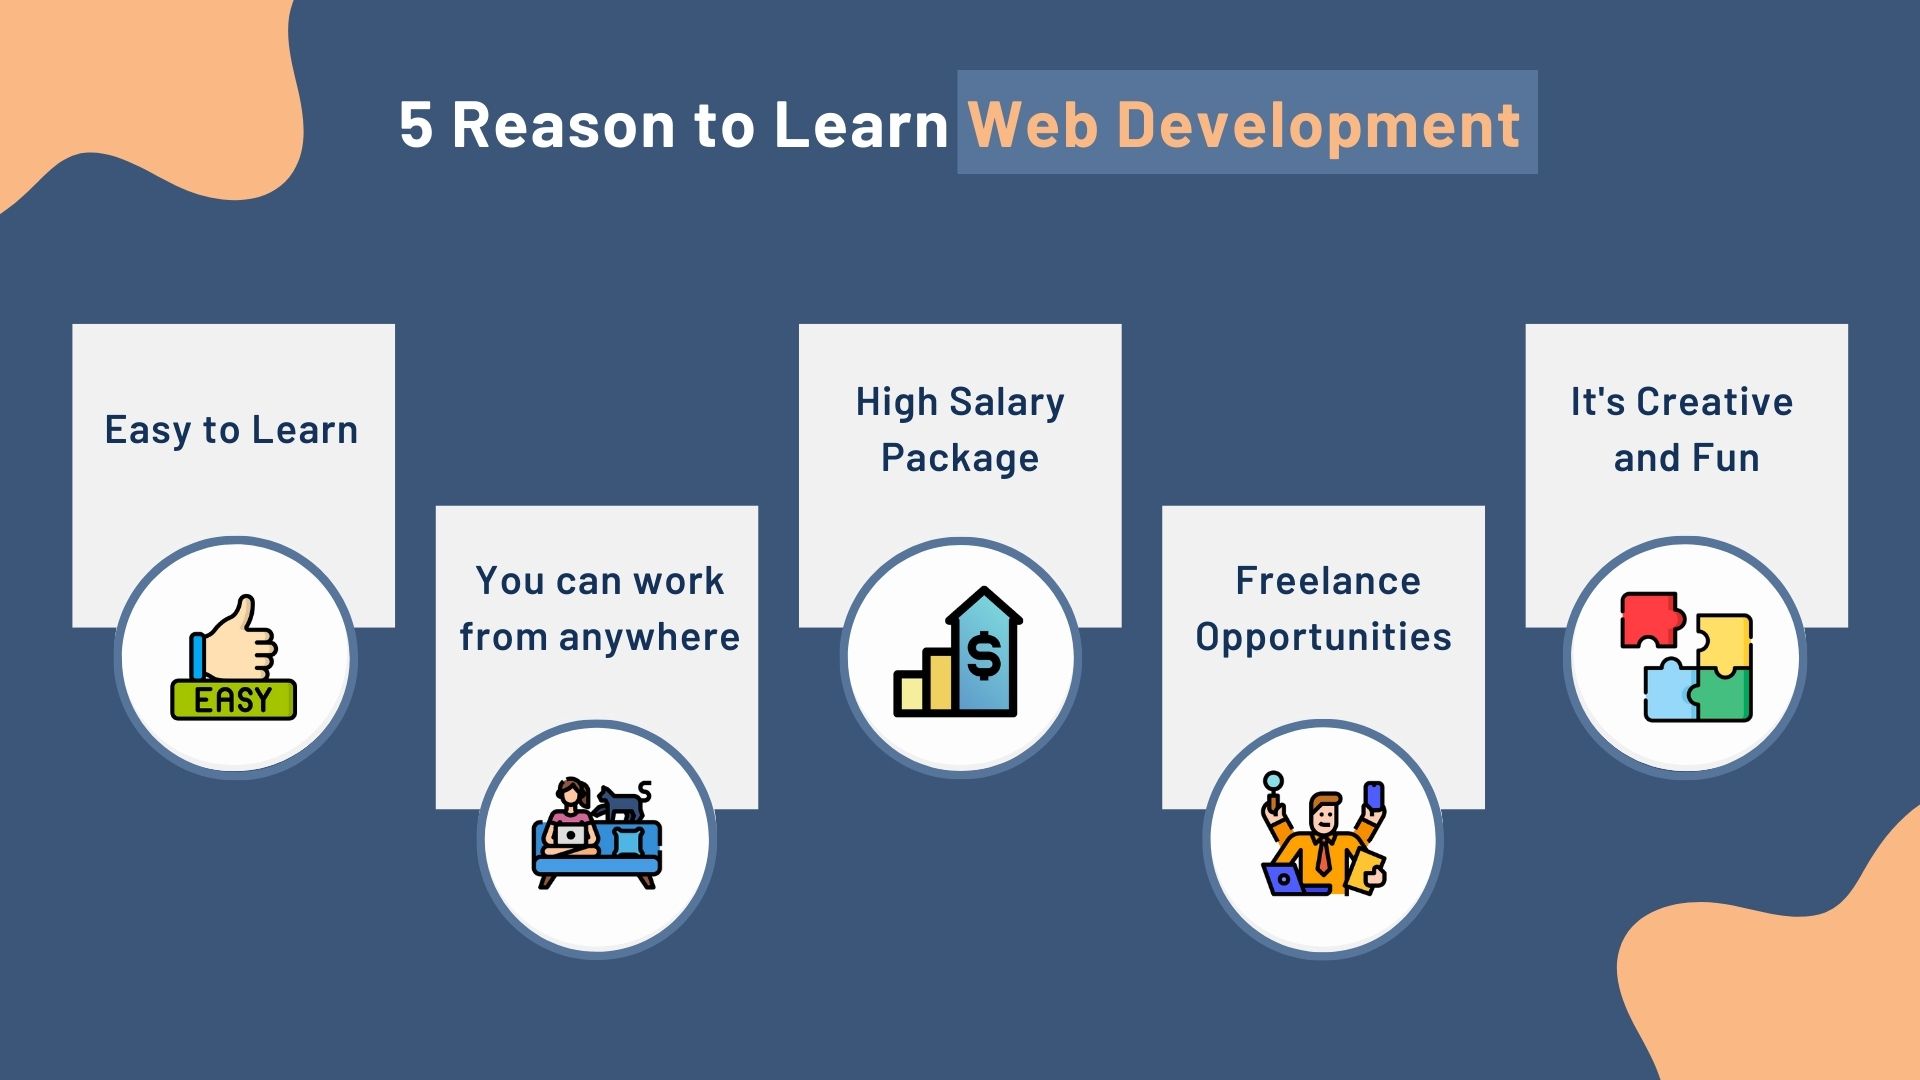 5 Compelling Reasons to Learn Web Development